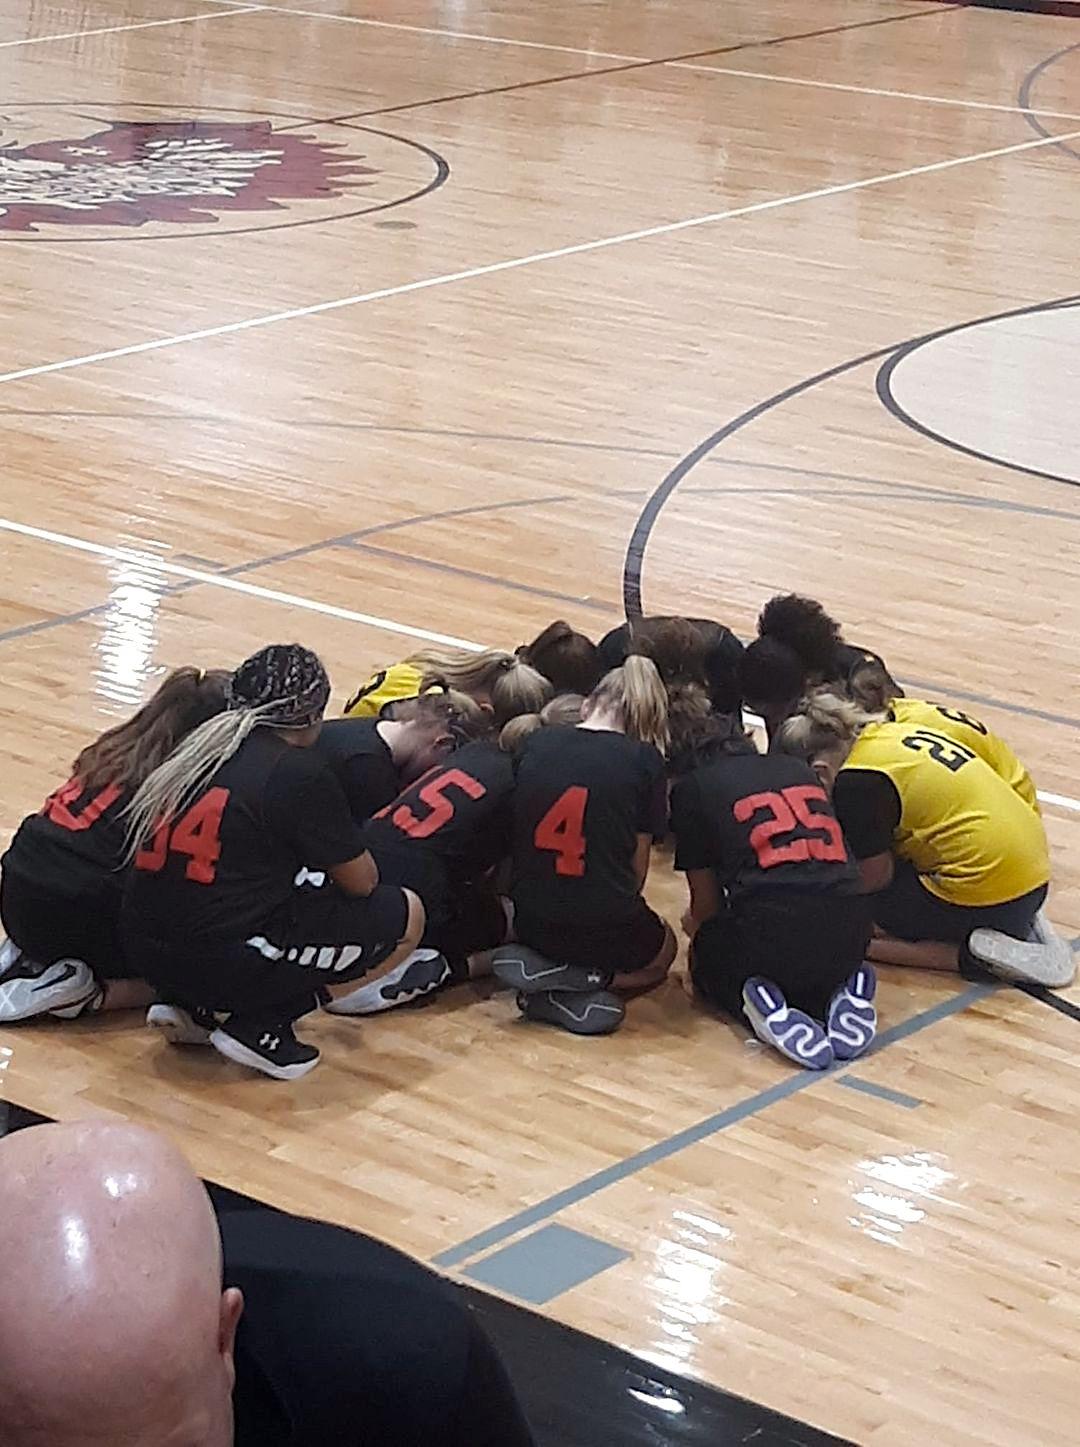 Players of opposing teams caught praying in the middle of the gym. (Courtesy of <a href="https://www.facebook.com/staci.cromer">Staci Cromer</a>)